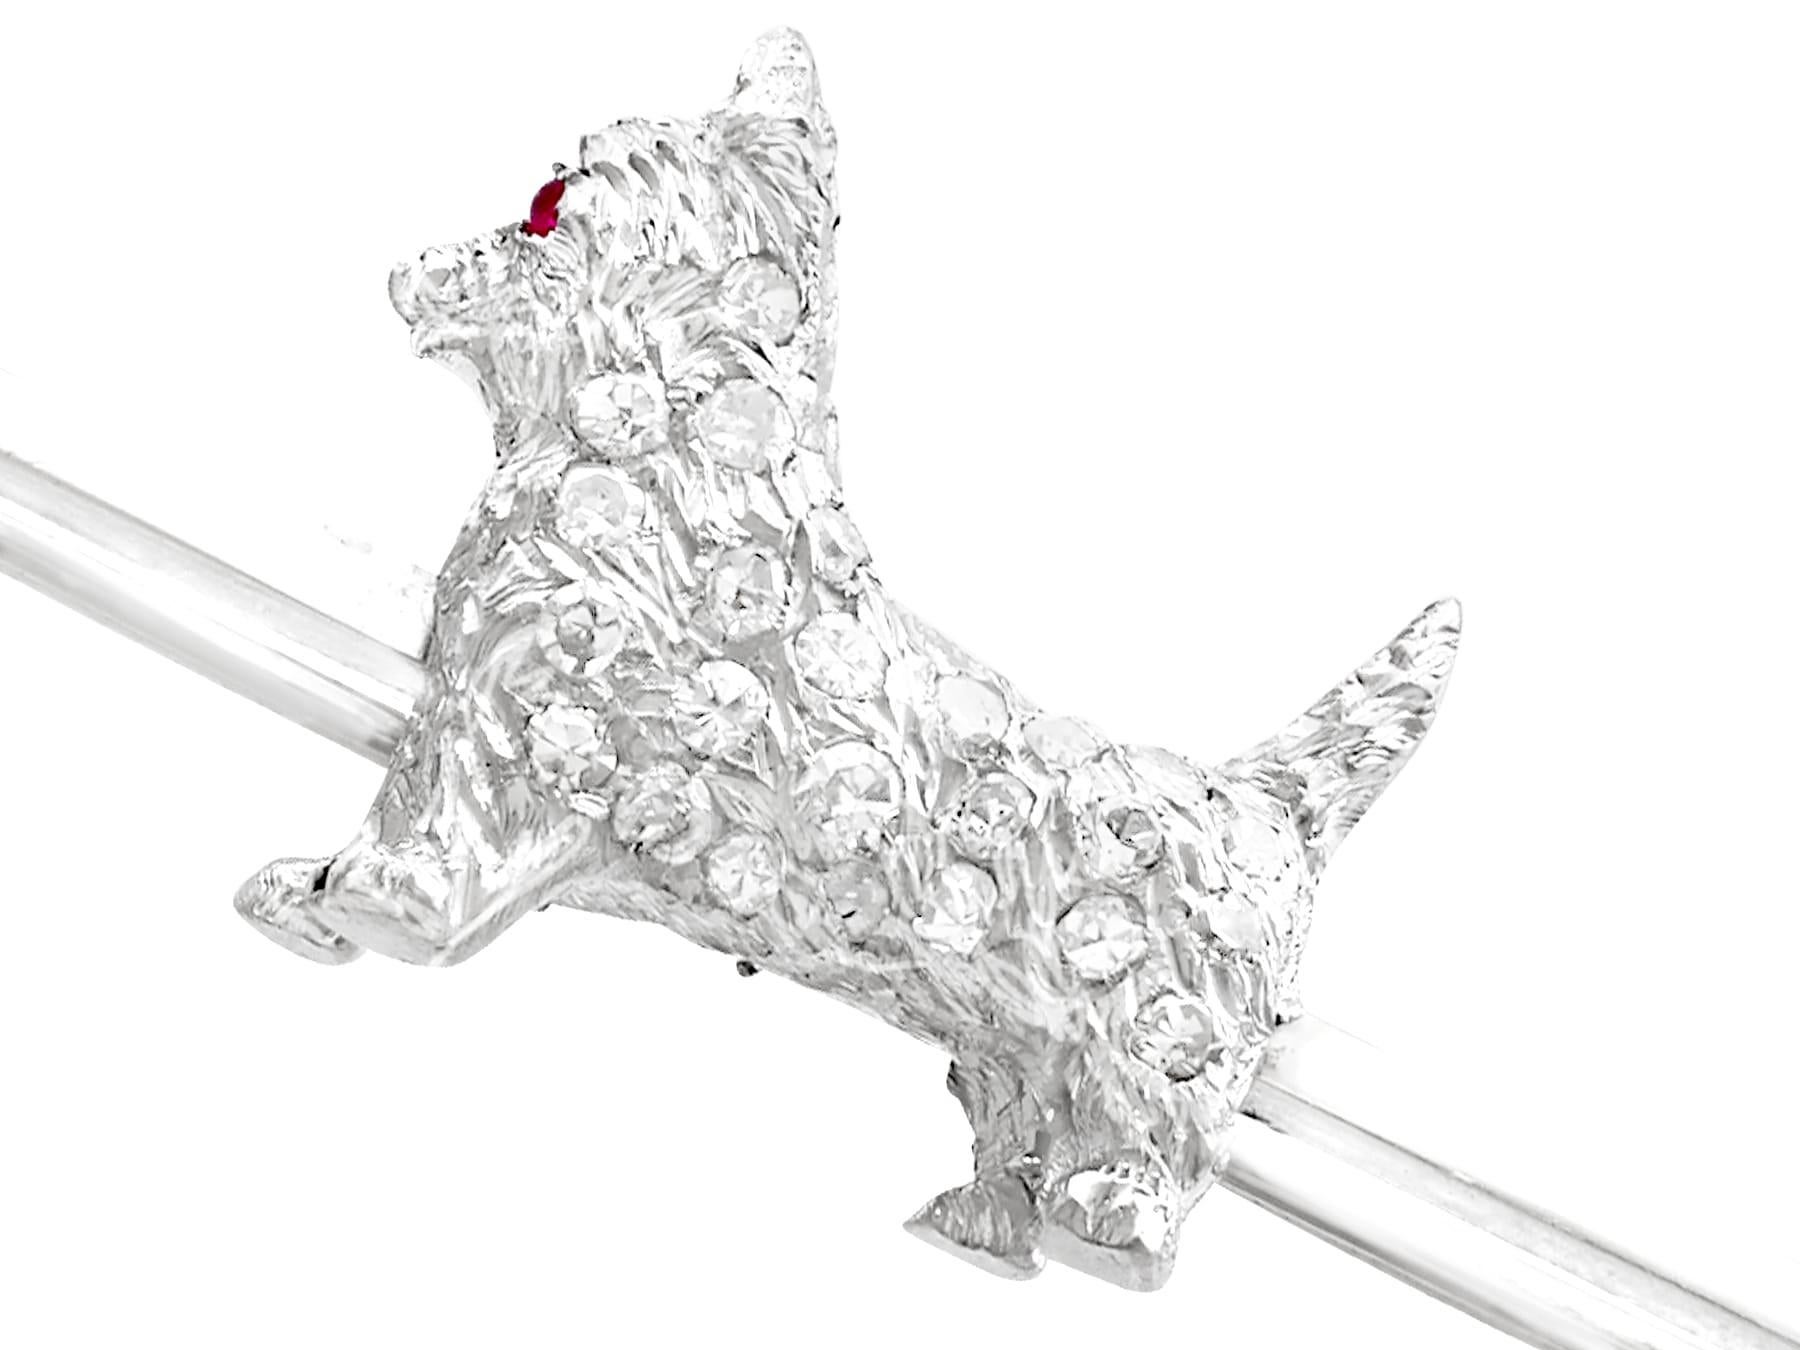 An impressive antique 0.02 Ct ruby and 0.48 Ct diamond, 18, 15 and 9k white gold 'West Highland Terrier' brooch; part of our diverse antique jewelry collections.

This fine and impressive antique dog brooch has been crafted in 18k, 15k and 9k white